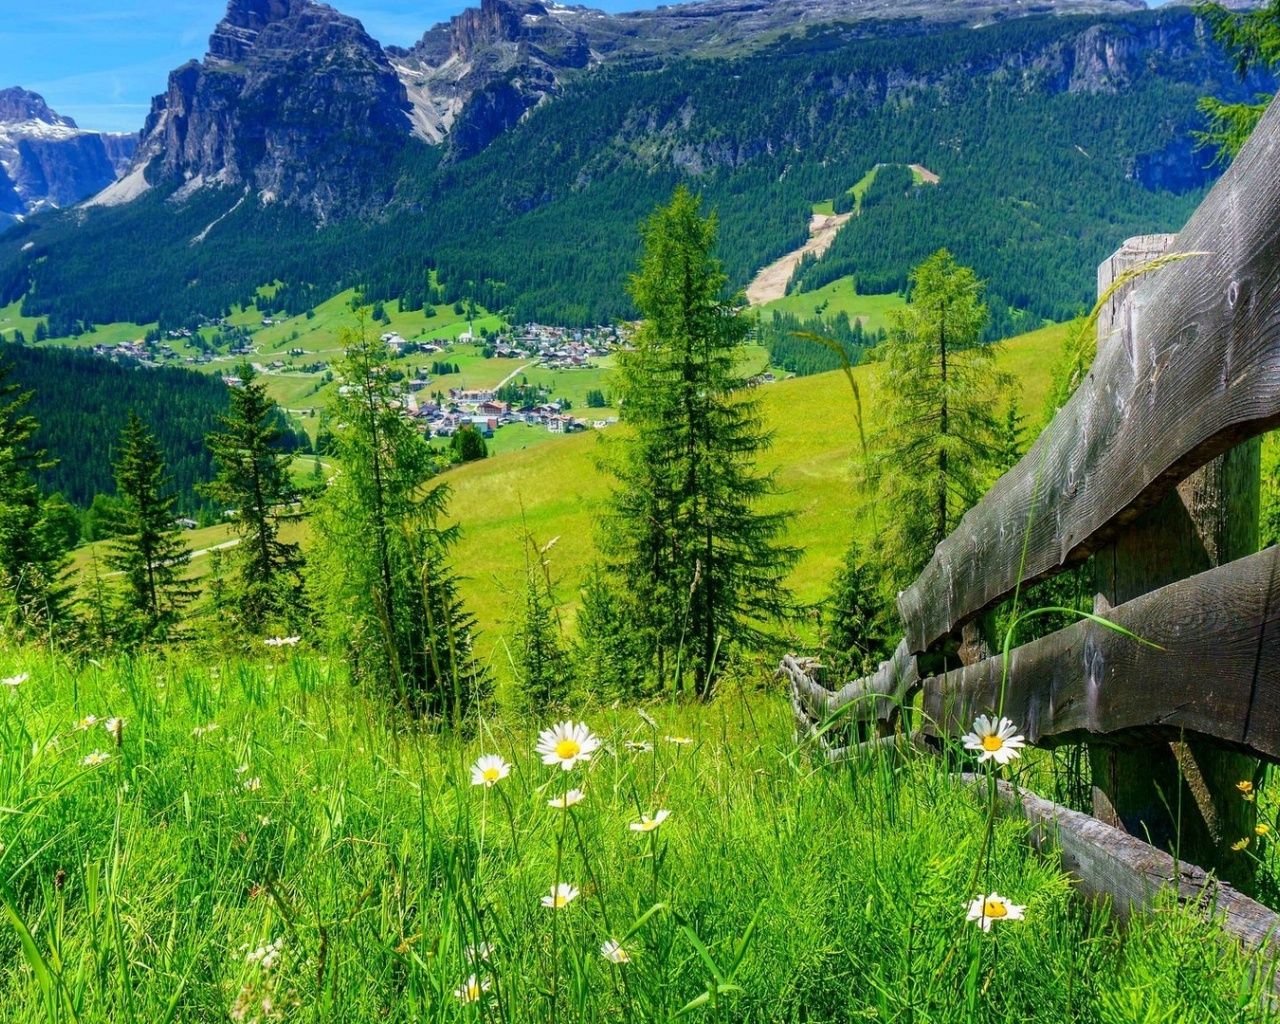 A wooden fence in a green field with mountains in the background - 1280x1024